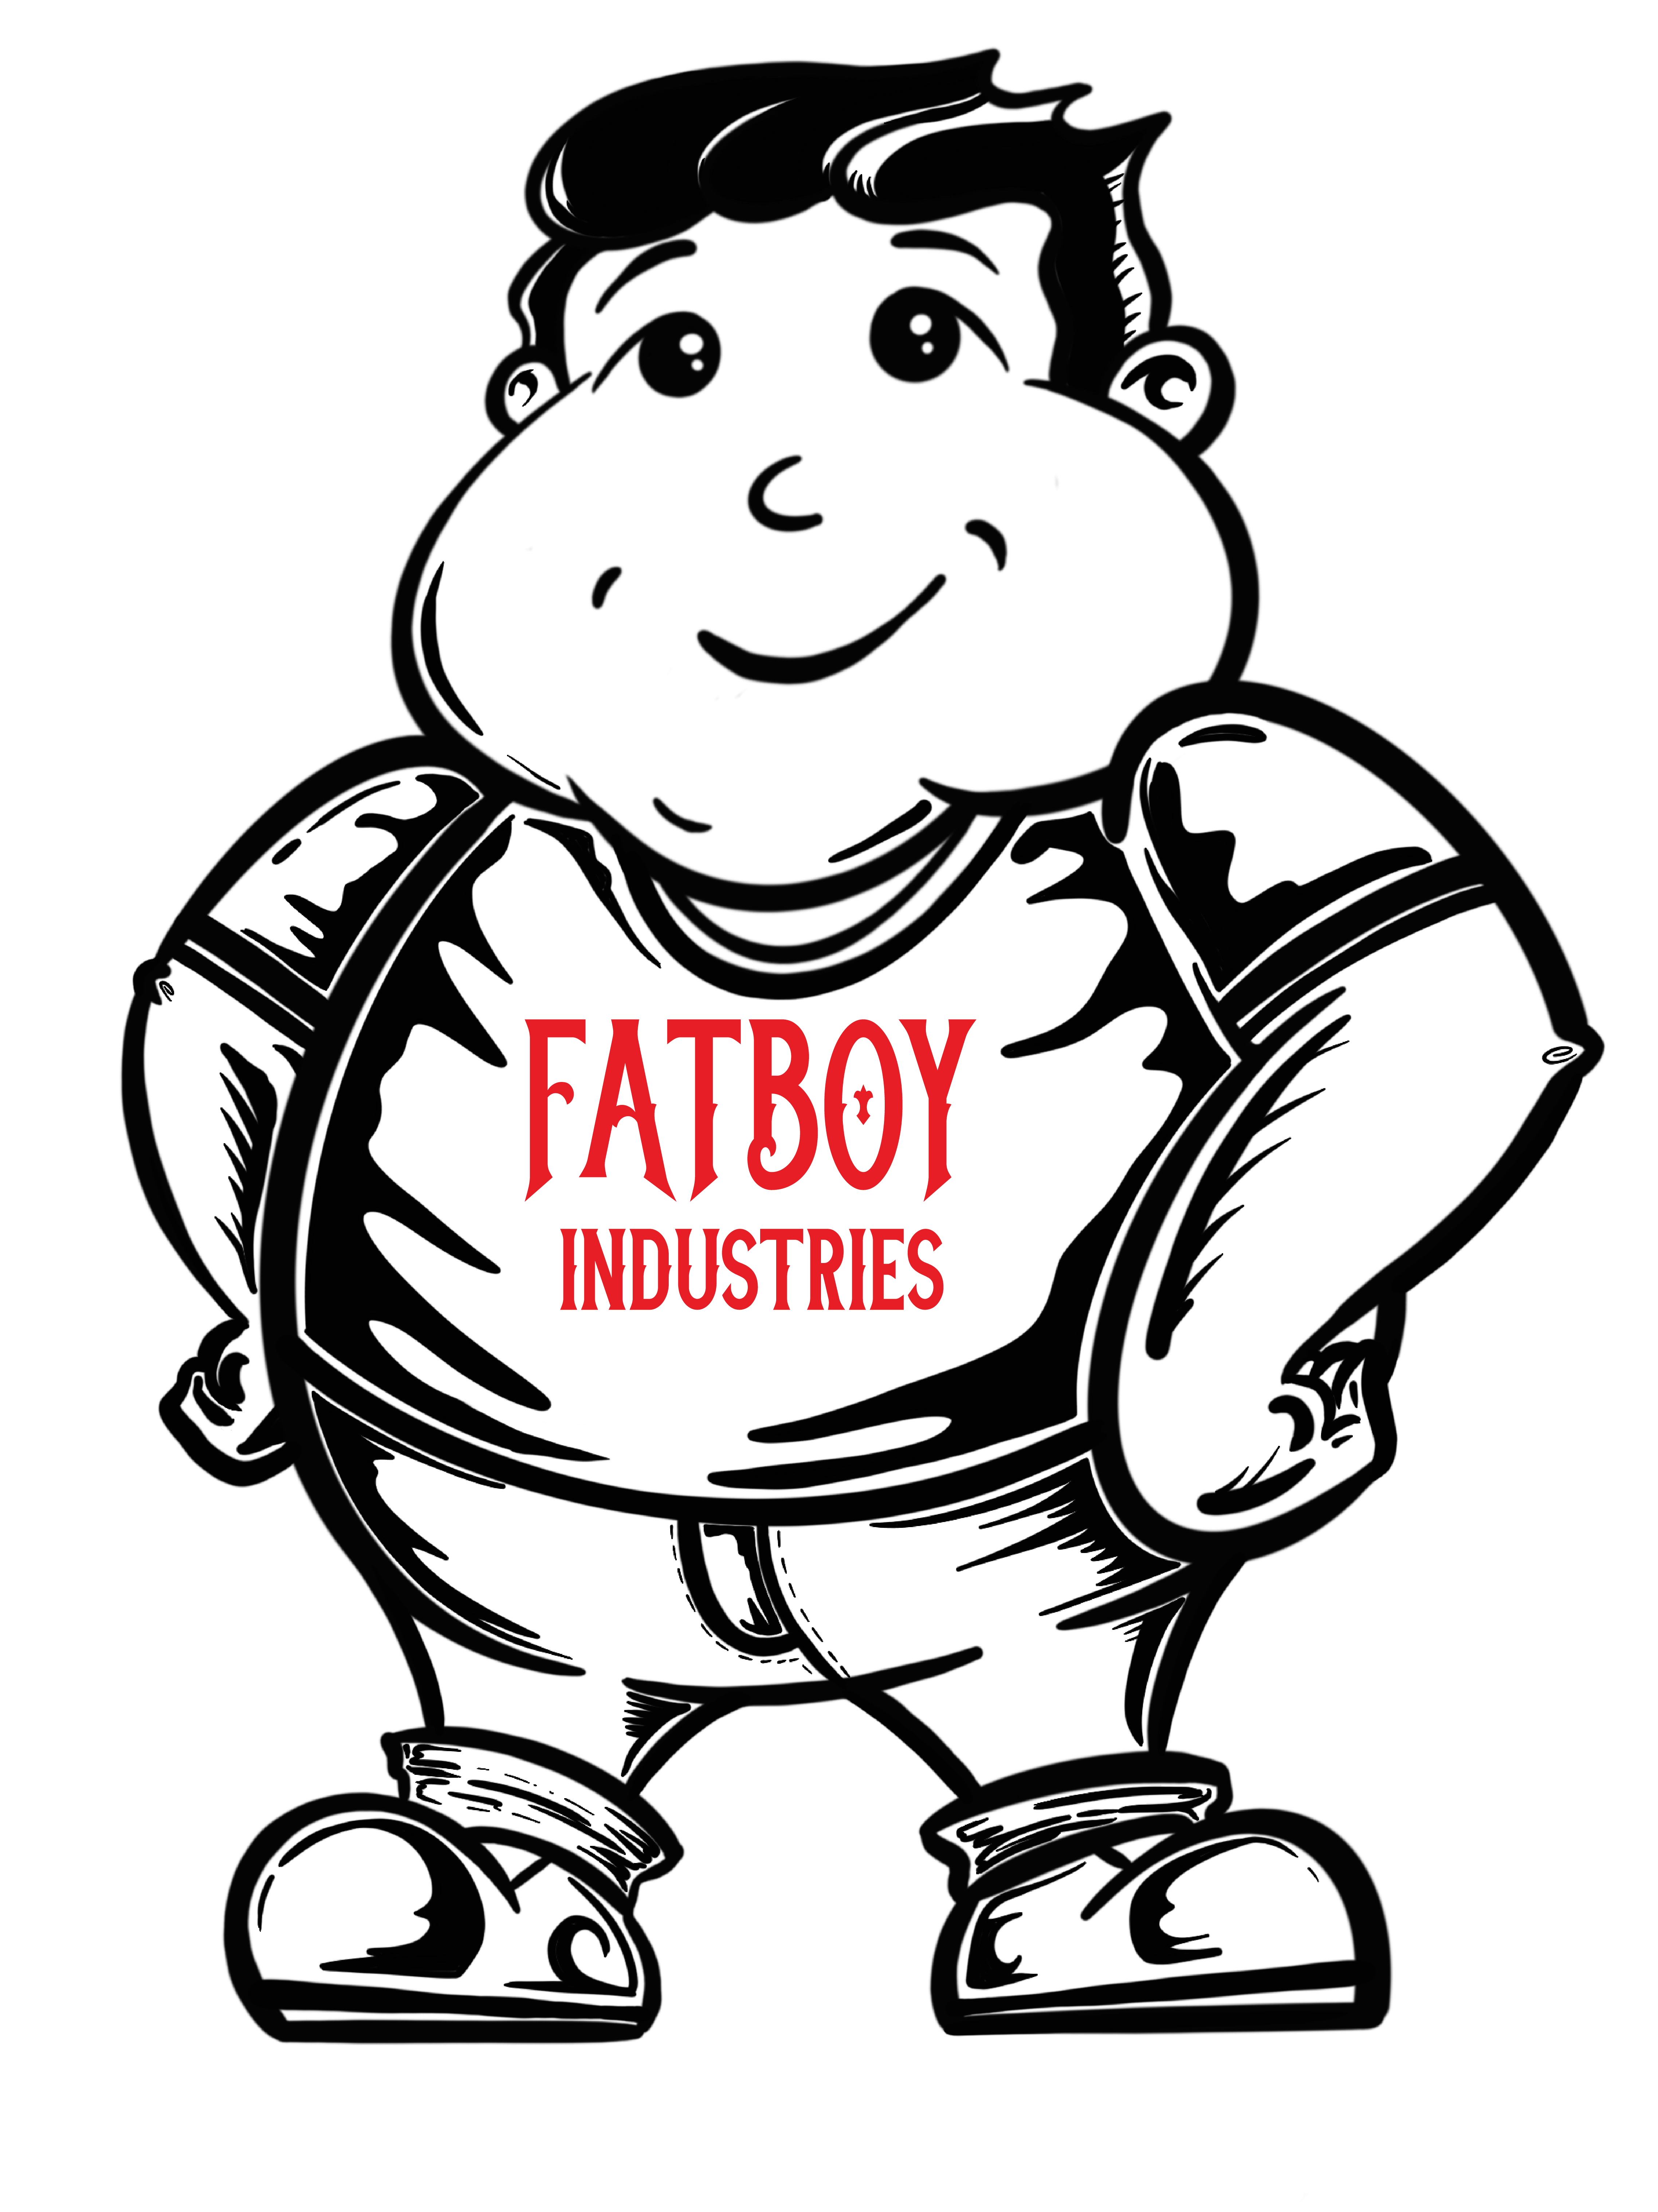 Article - FATBOY INDUSTRIES